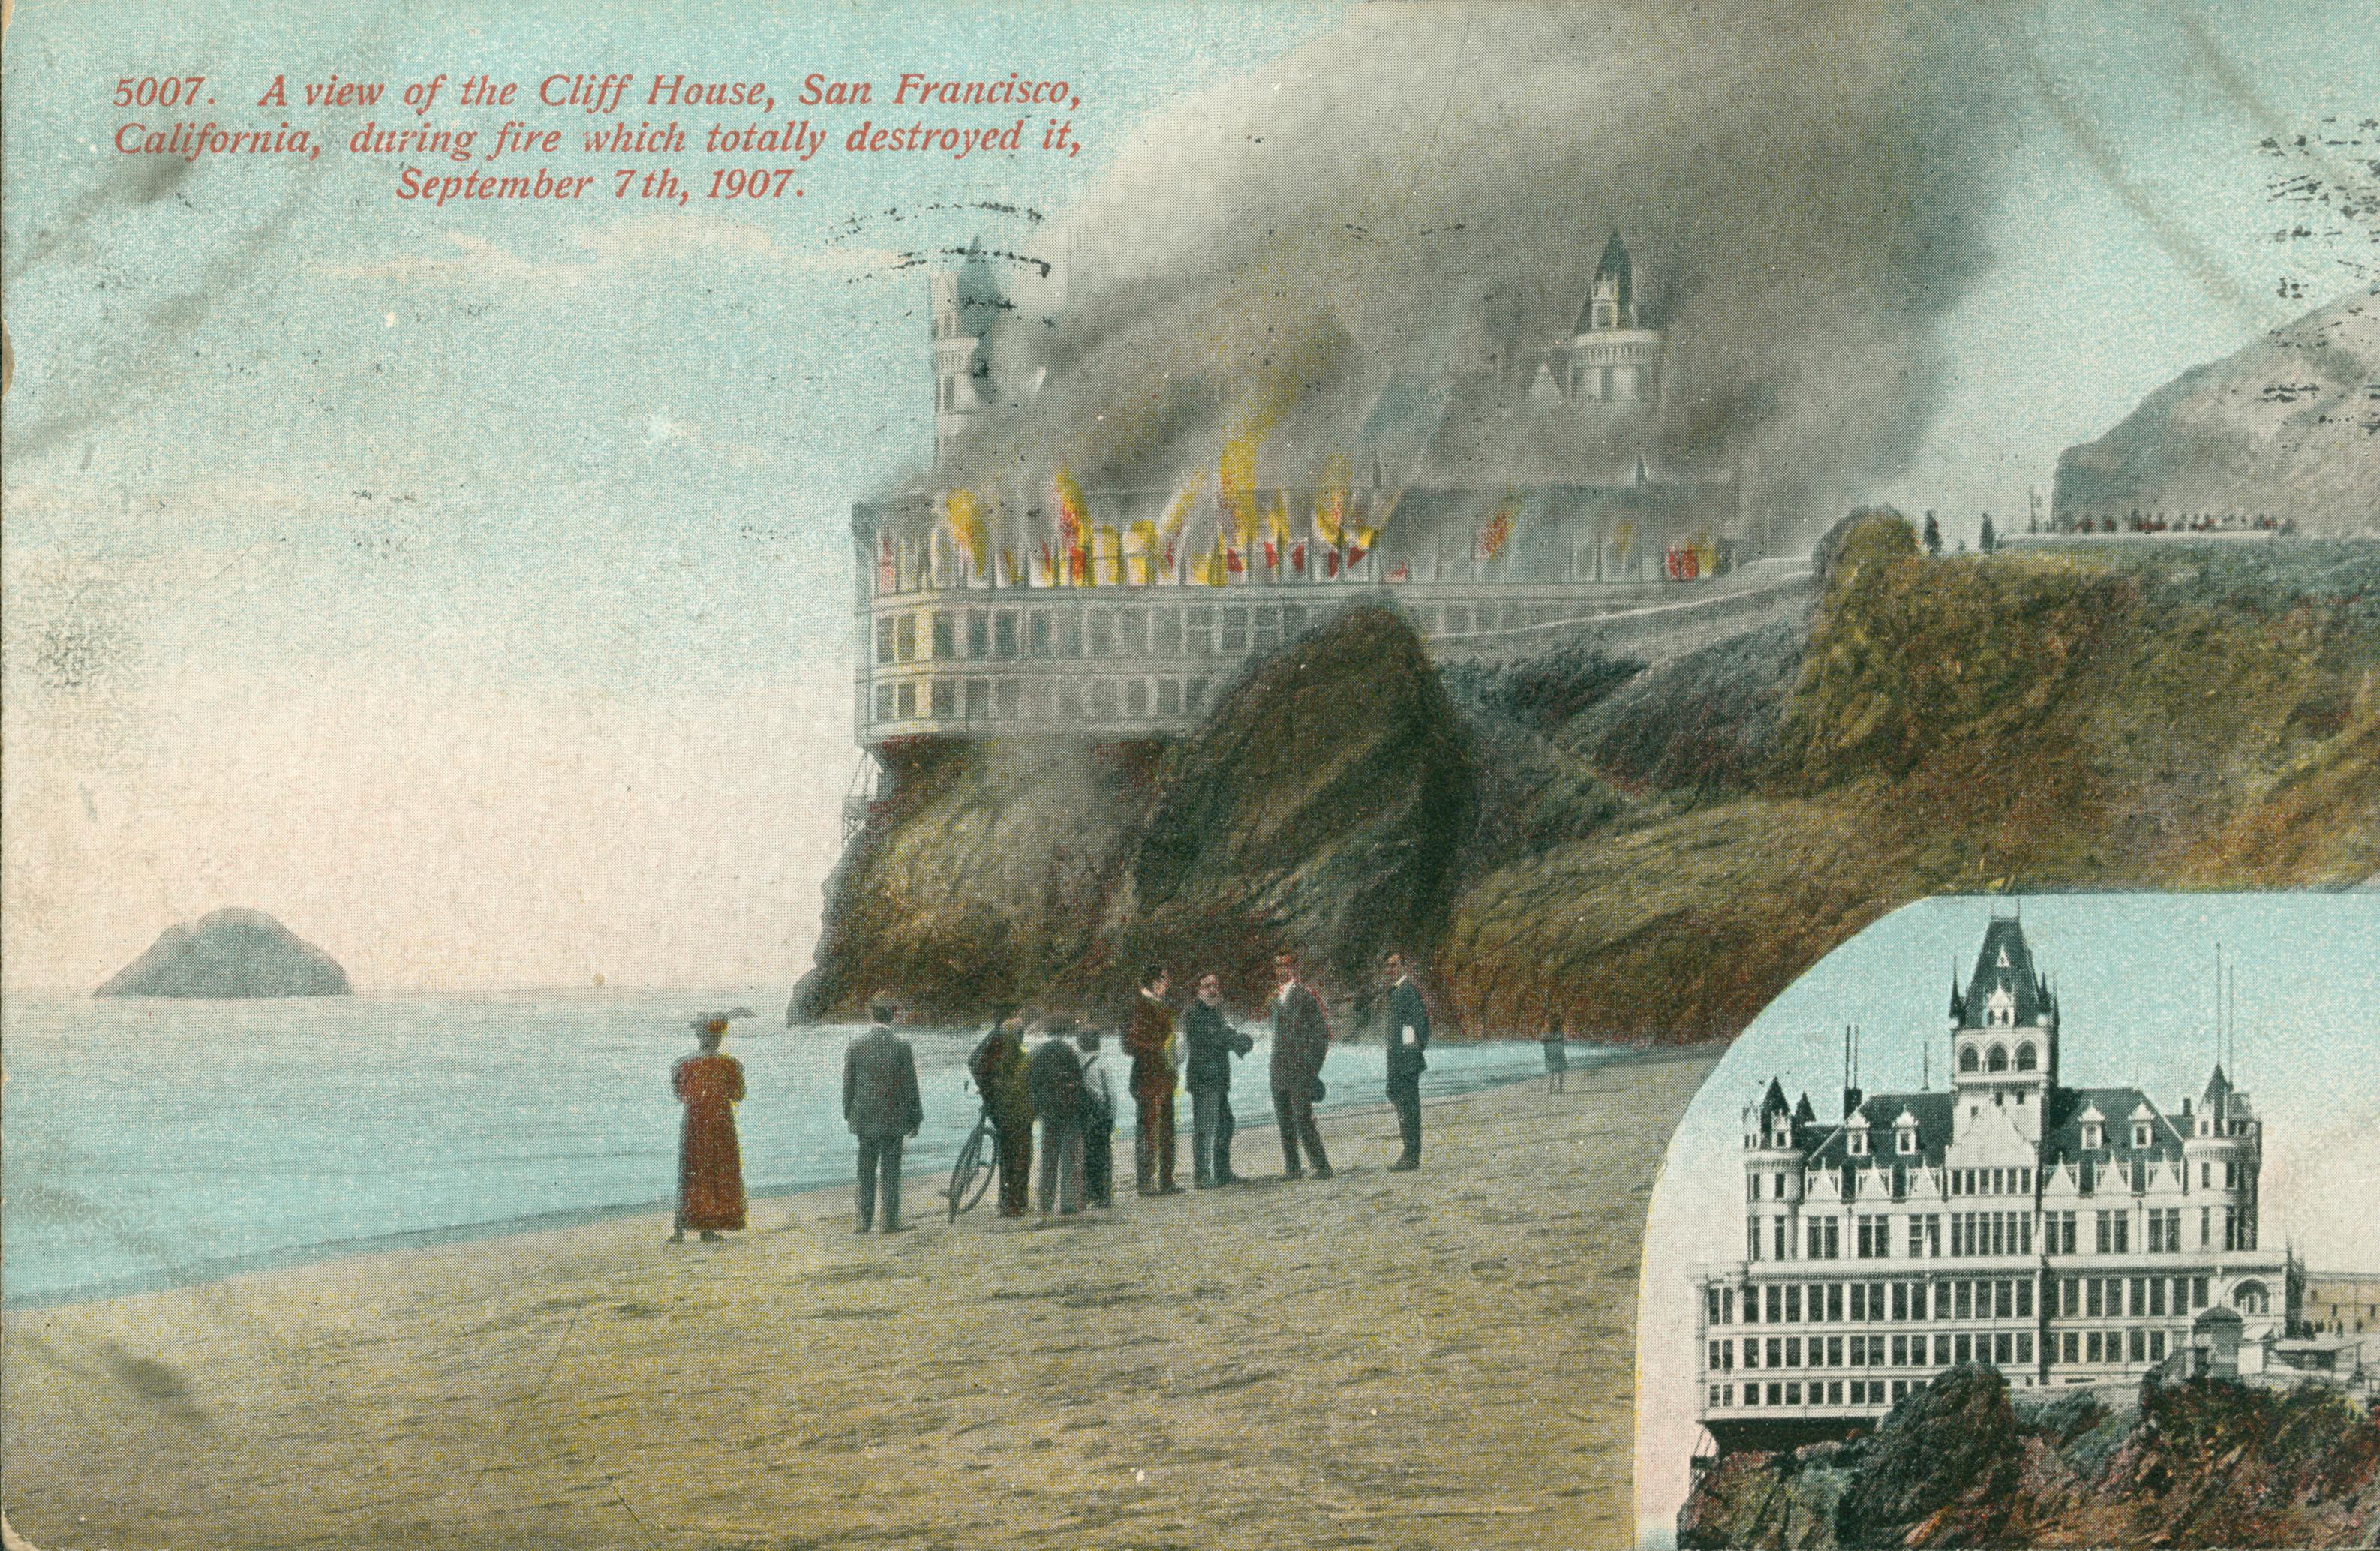 Shows the Cliff House on fire with several individuals looking on from the beach.